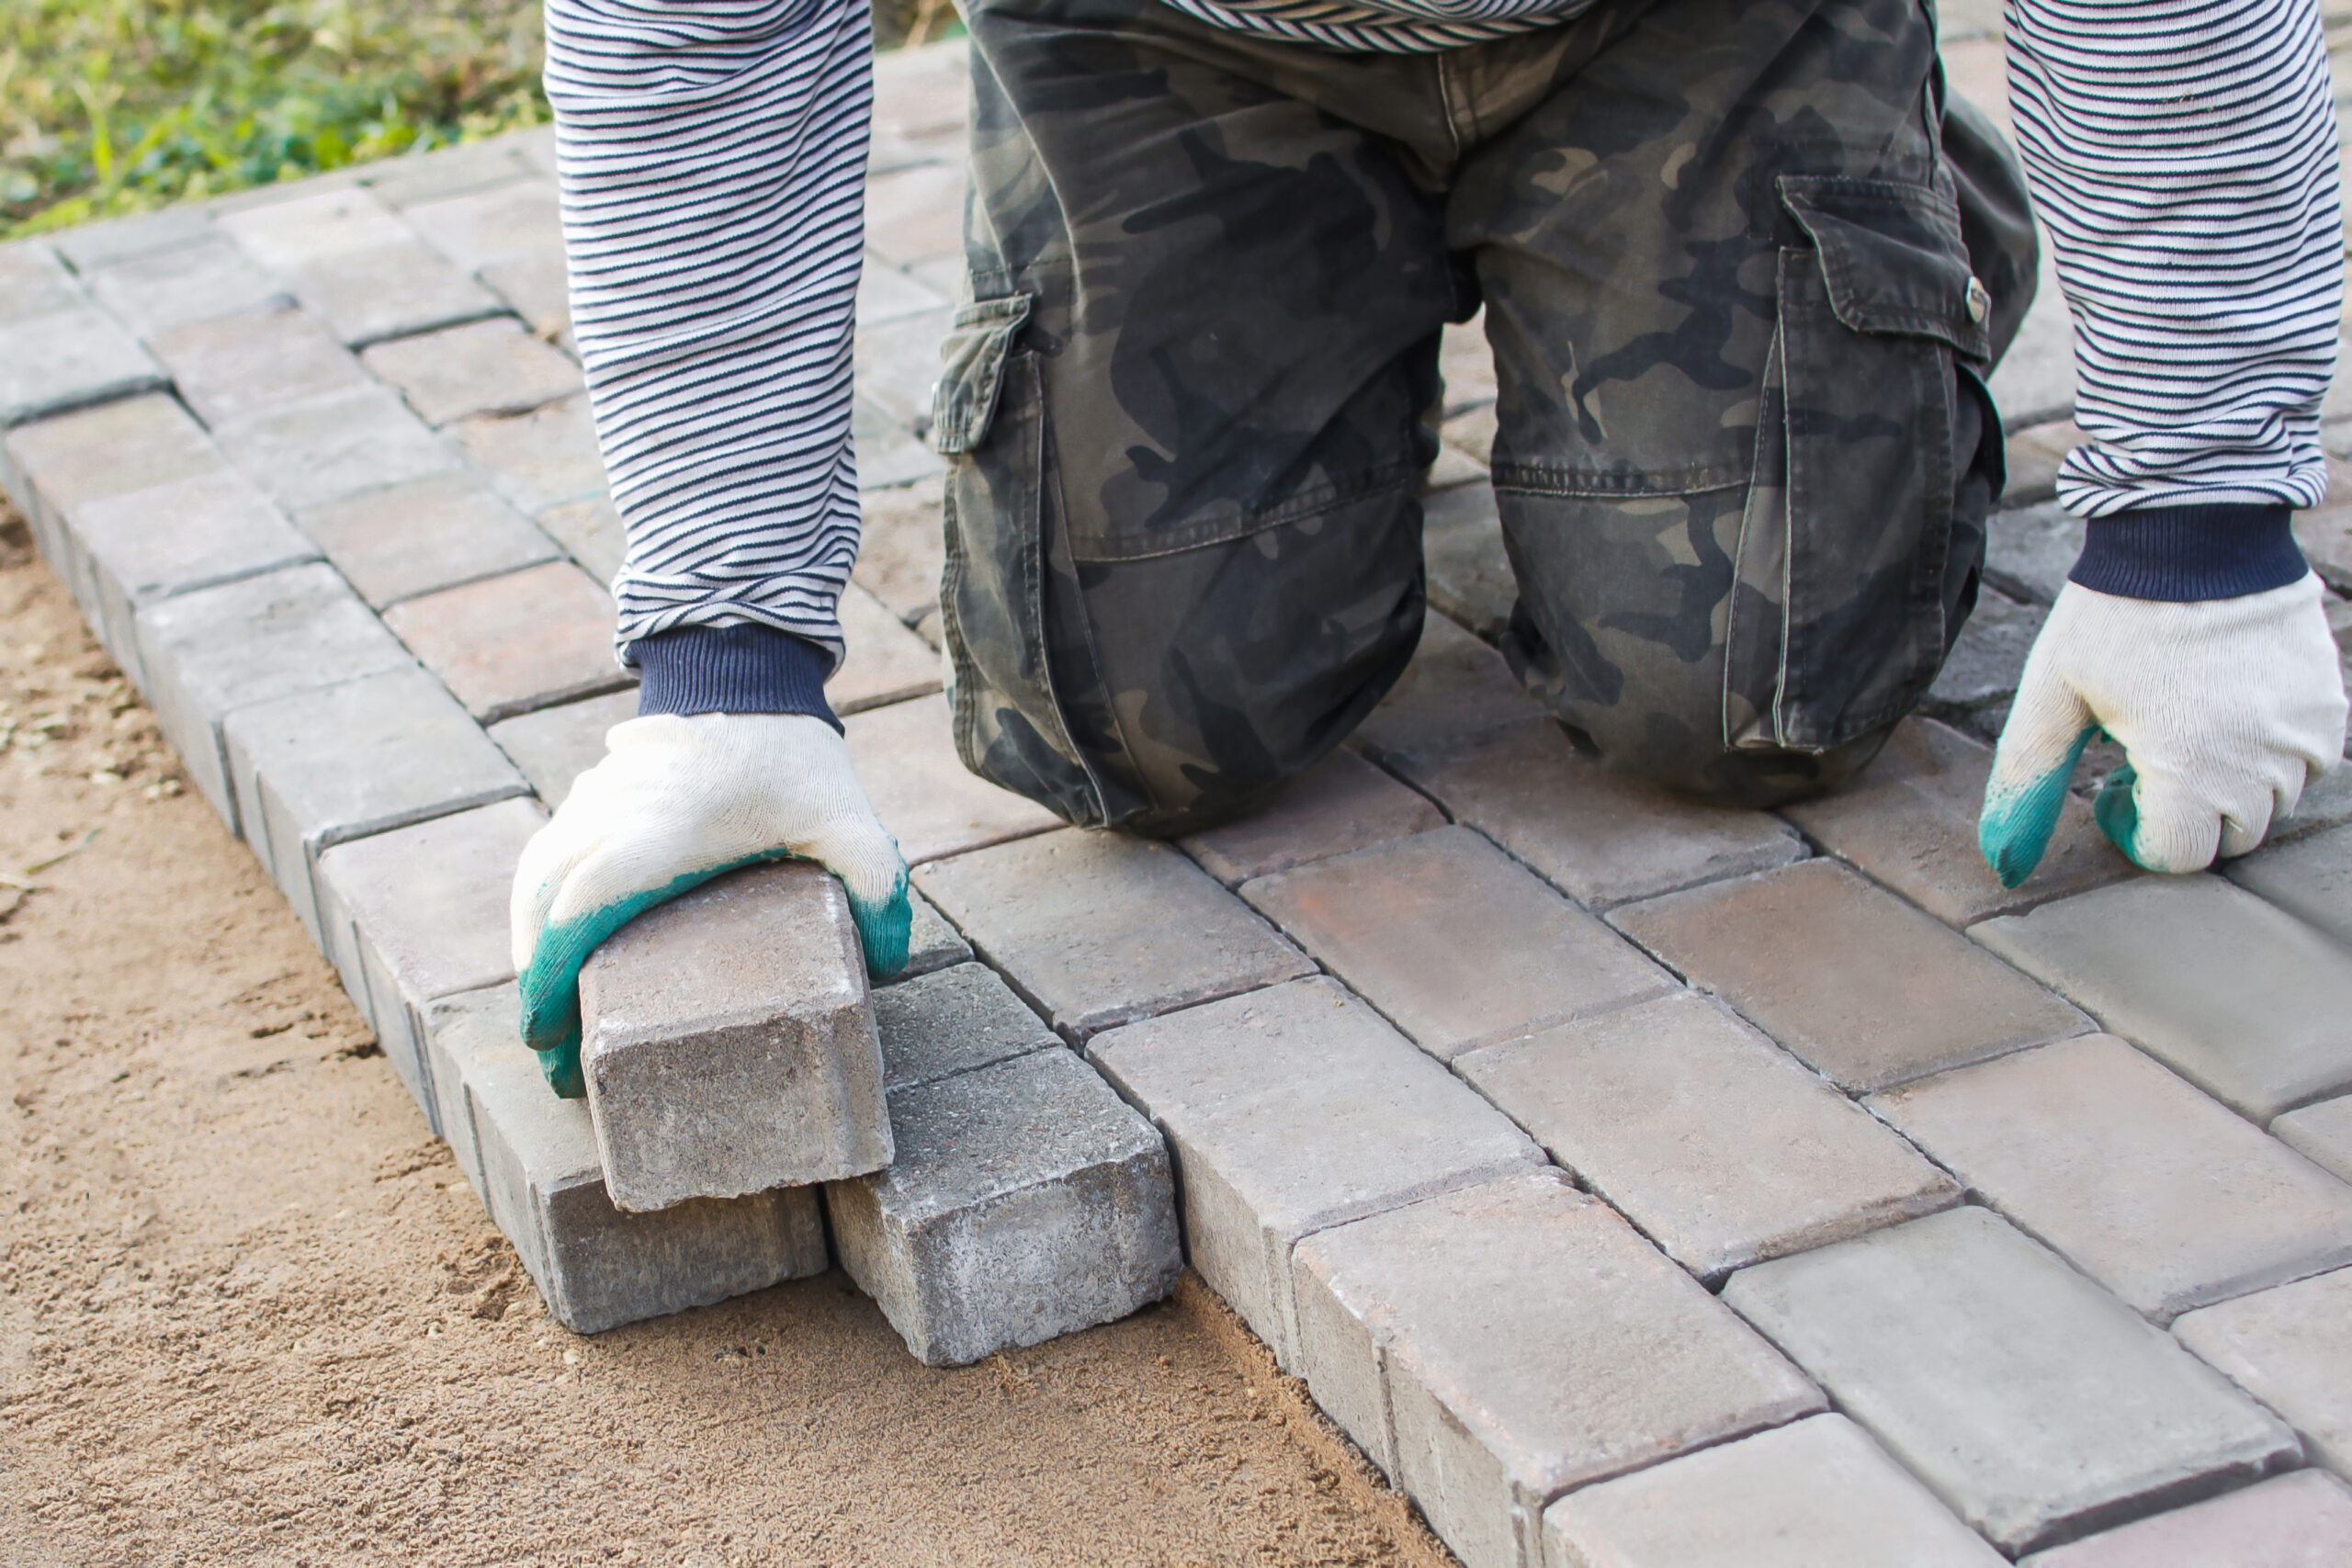 Worker in striped shirt and camo pants placing paving stones on a pathway outdoors.